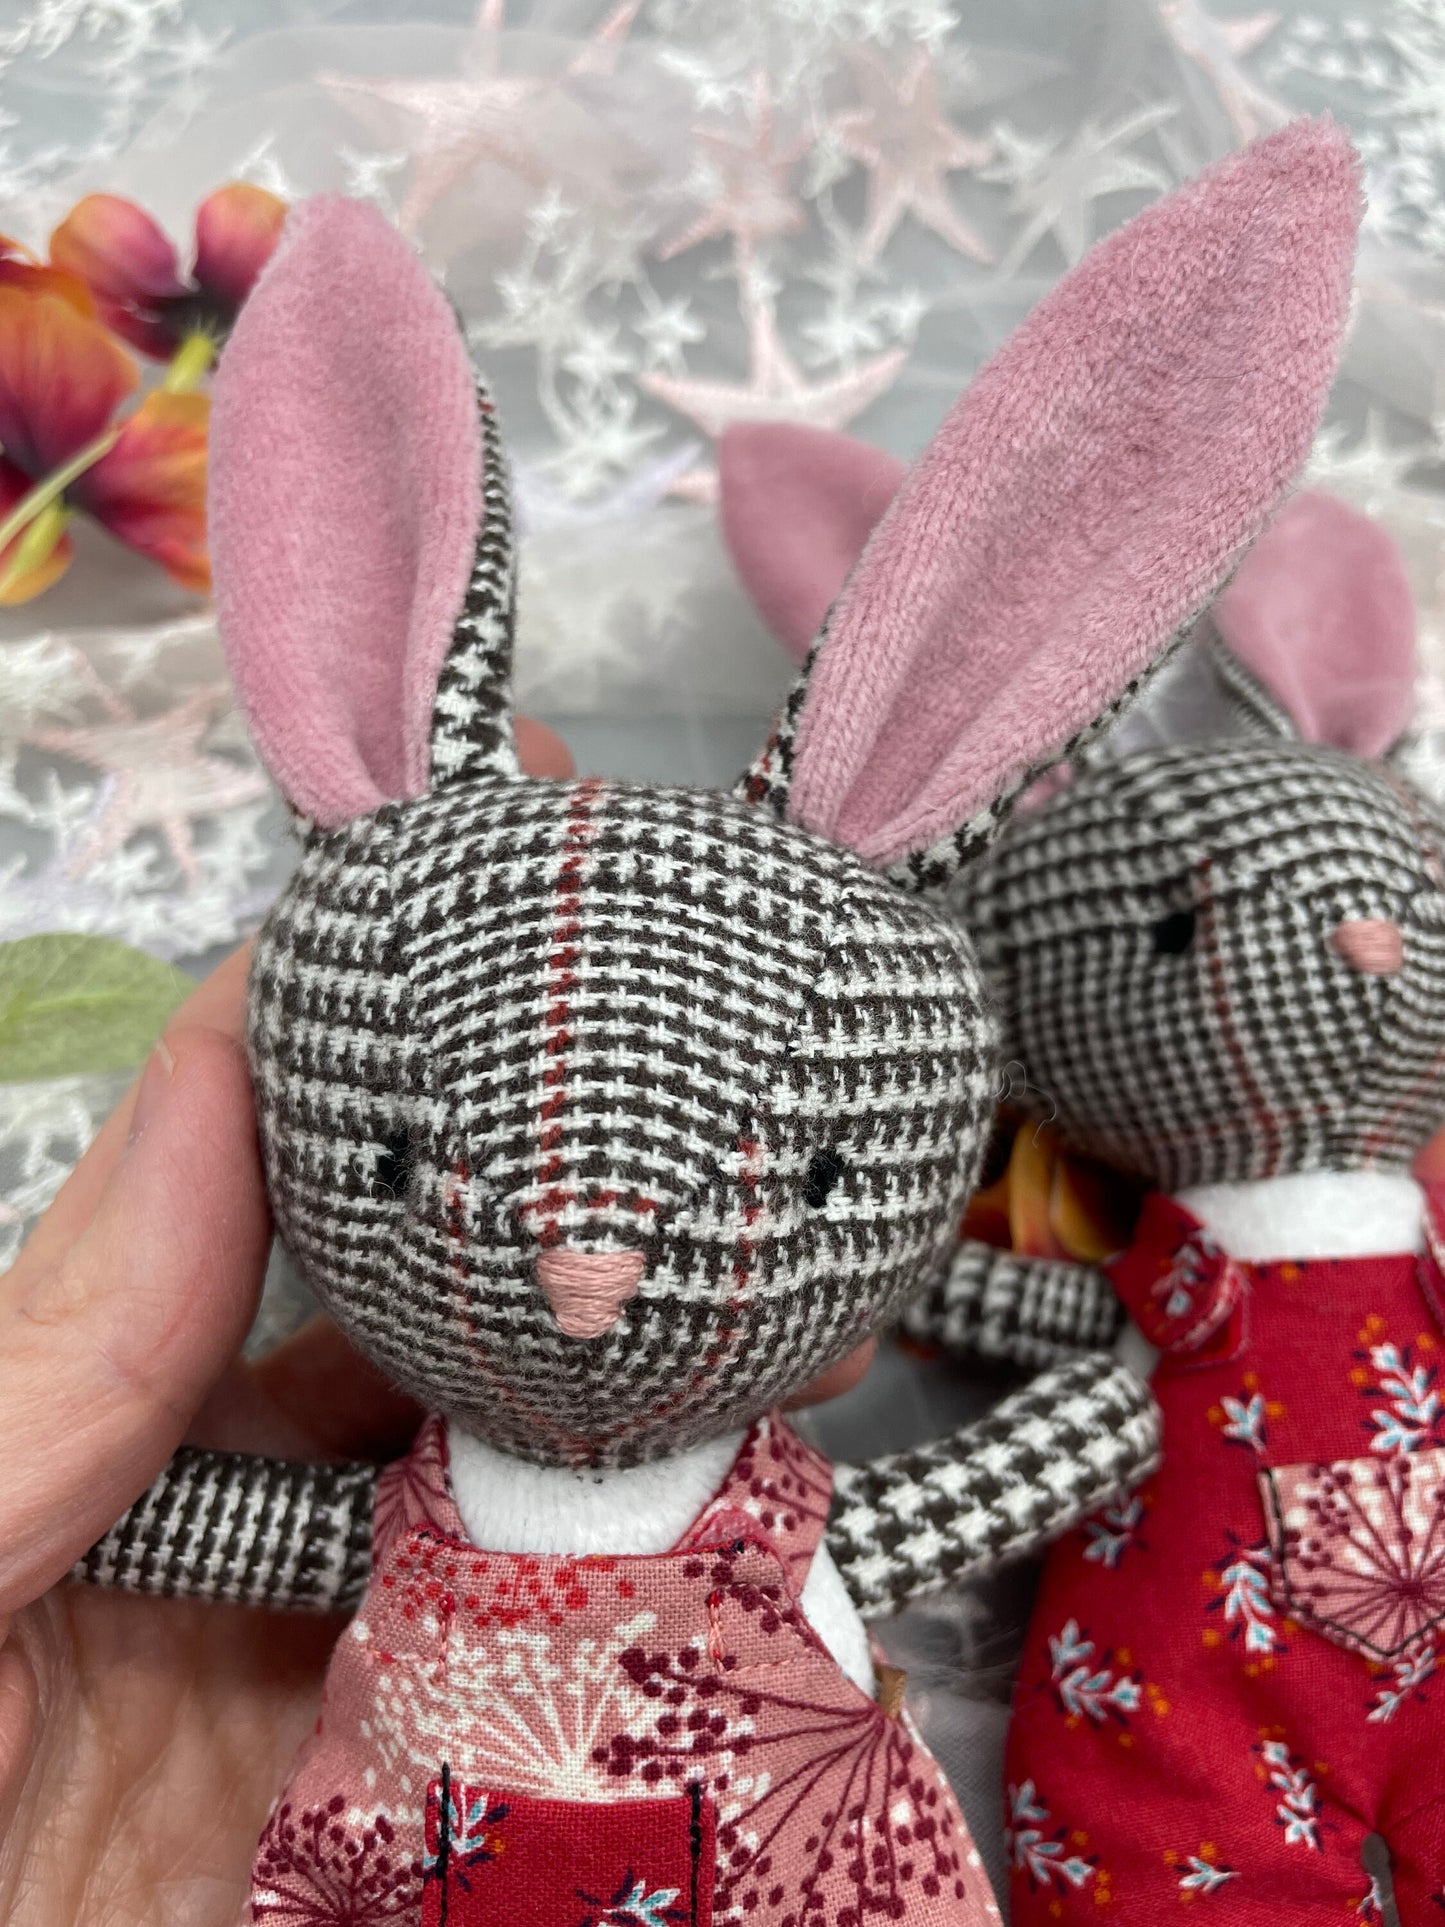 Handmade Easter Bunny Doll, Stuffed bunny, Reversible clothes, easter basket idea, rabbit, gift for kids, plaid, boy doll, rabbit doll